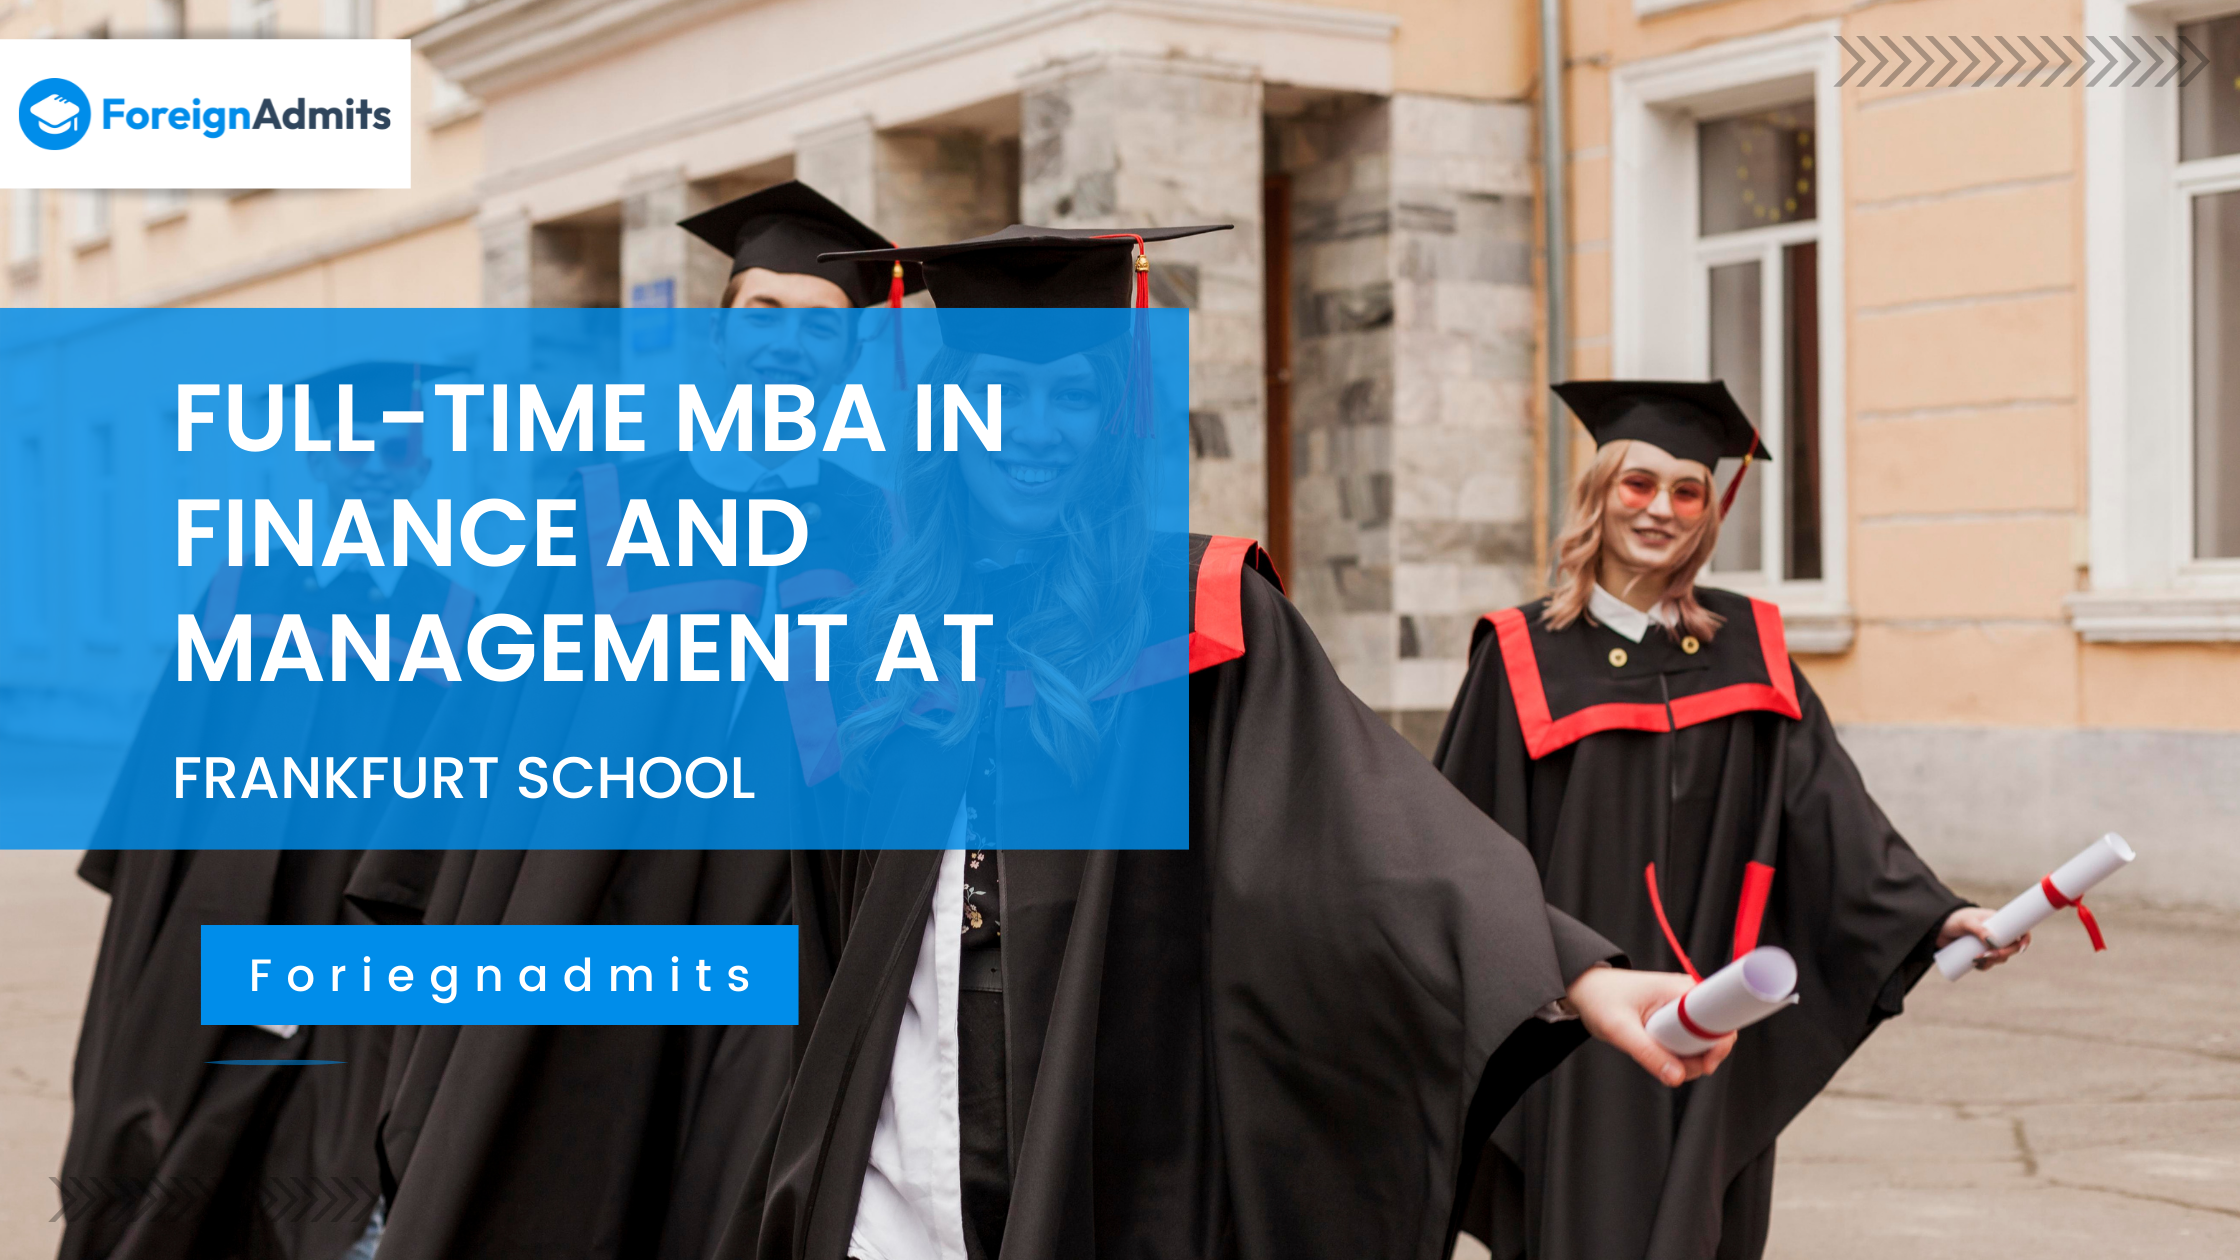 FULL-TIME MBA IN FINANCE AND MANAGEMENT AT FRANKFURT SCHOOL